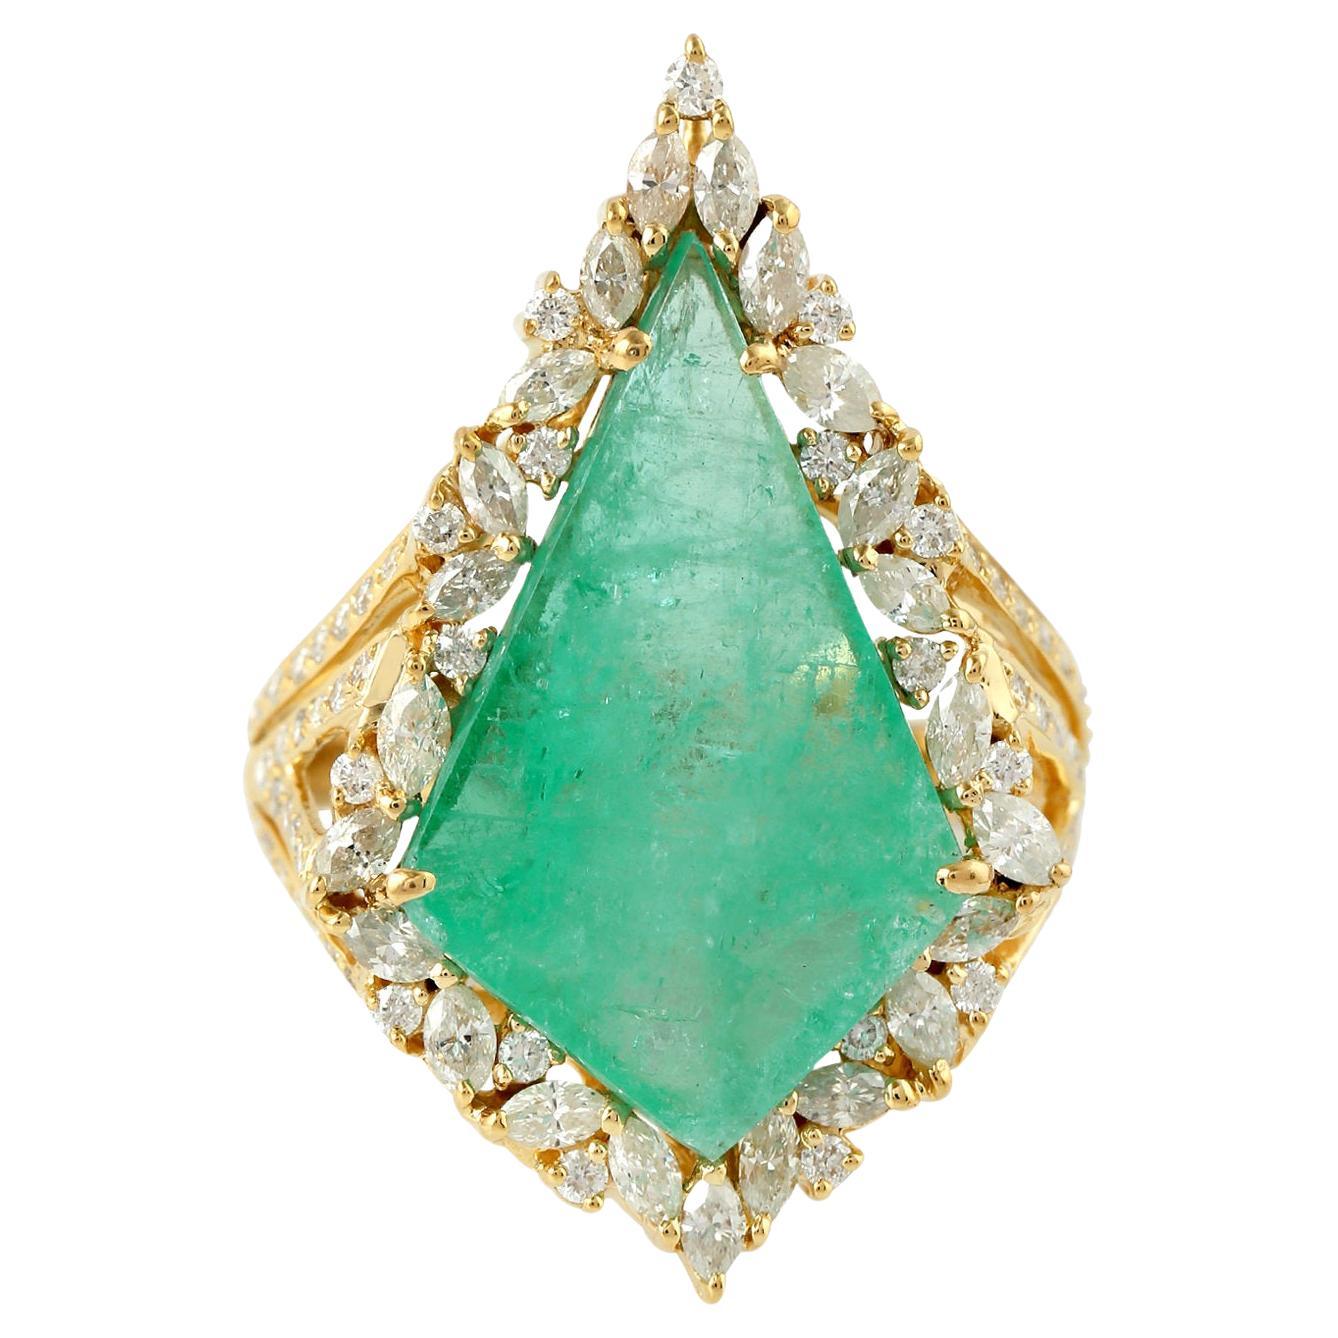 Rhombus Shaped Emerald cocktail Ring With Diamonds Made In 18k yellow Gold